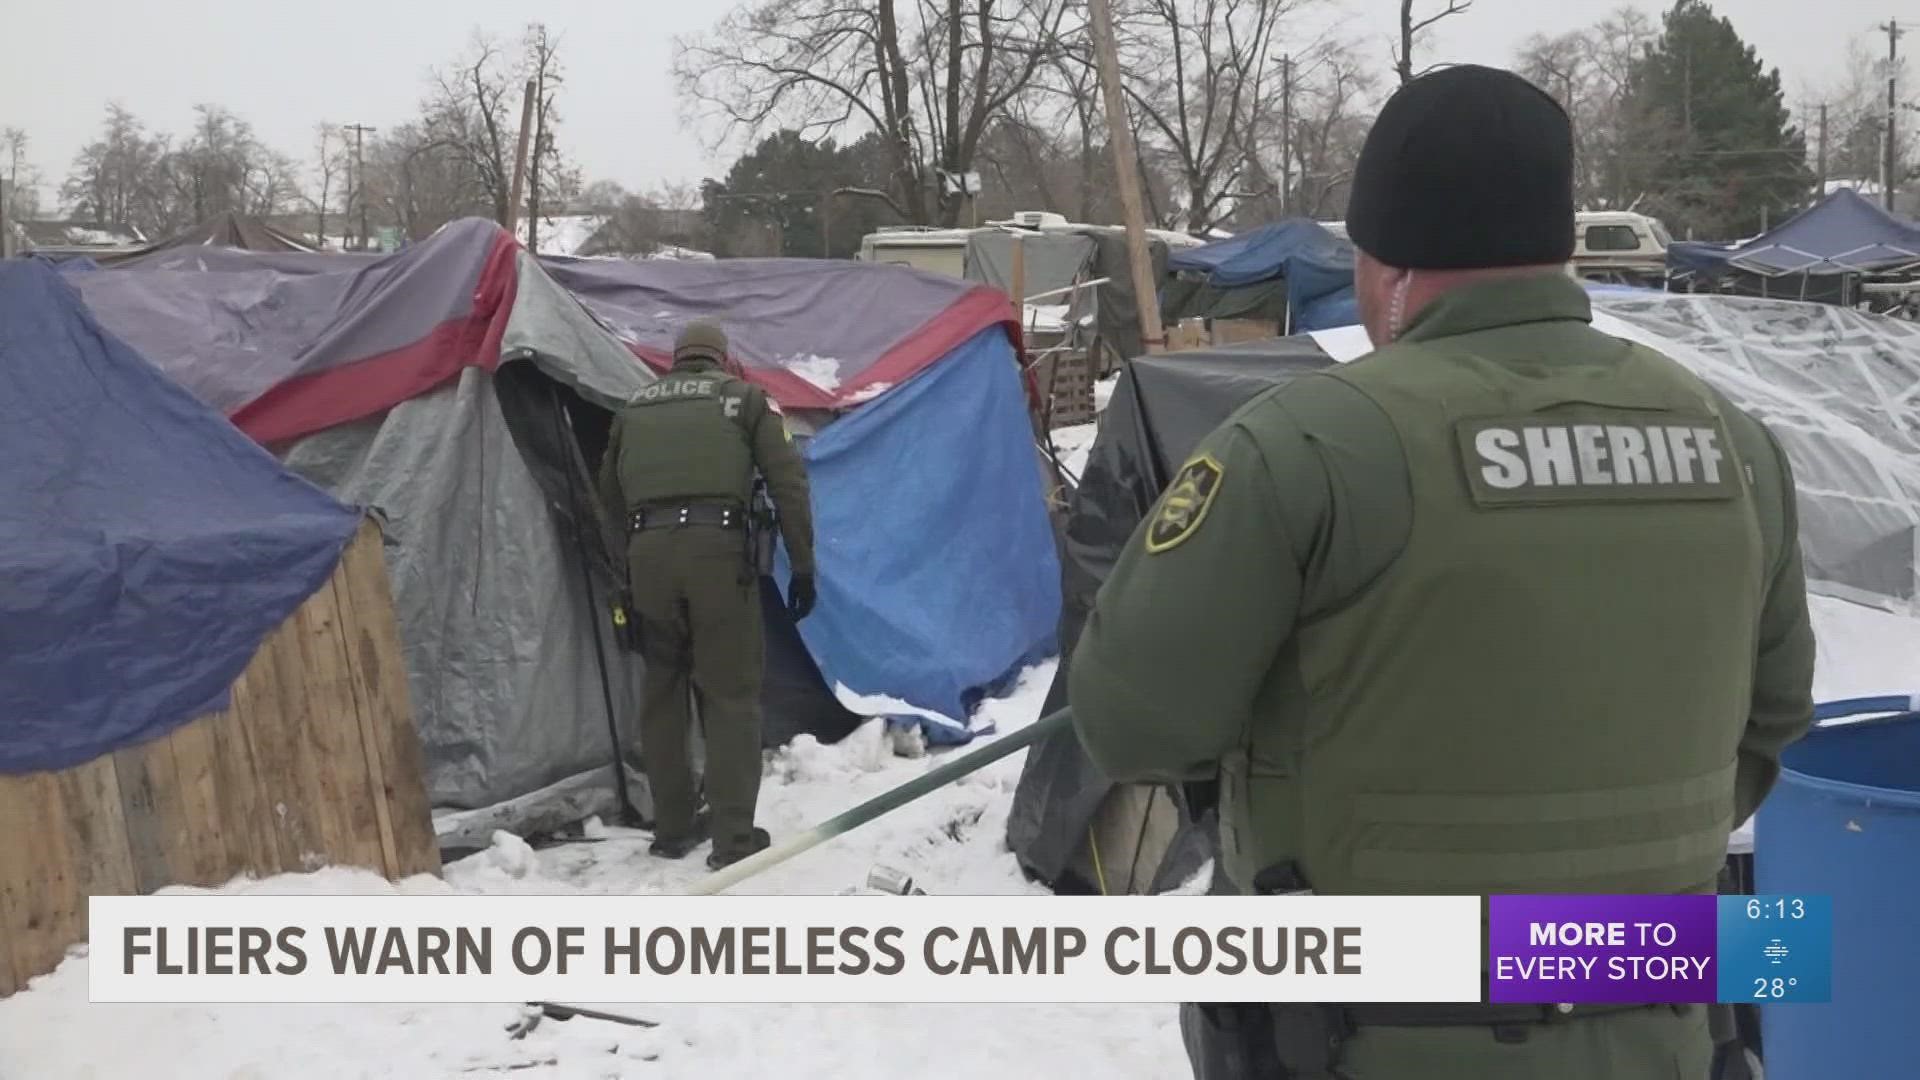 Providers say that people living at the camp already have the information in these flyers and that bringing people in uniform to distribute them is a scare tactic.